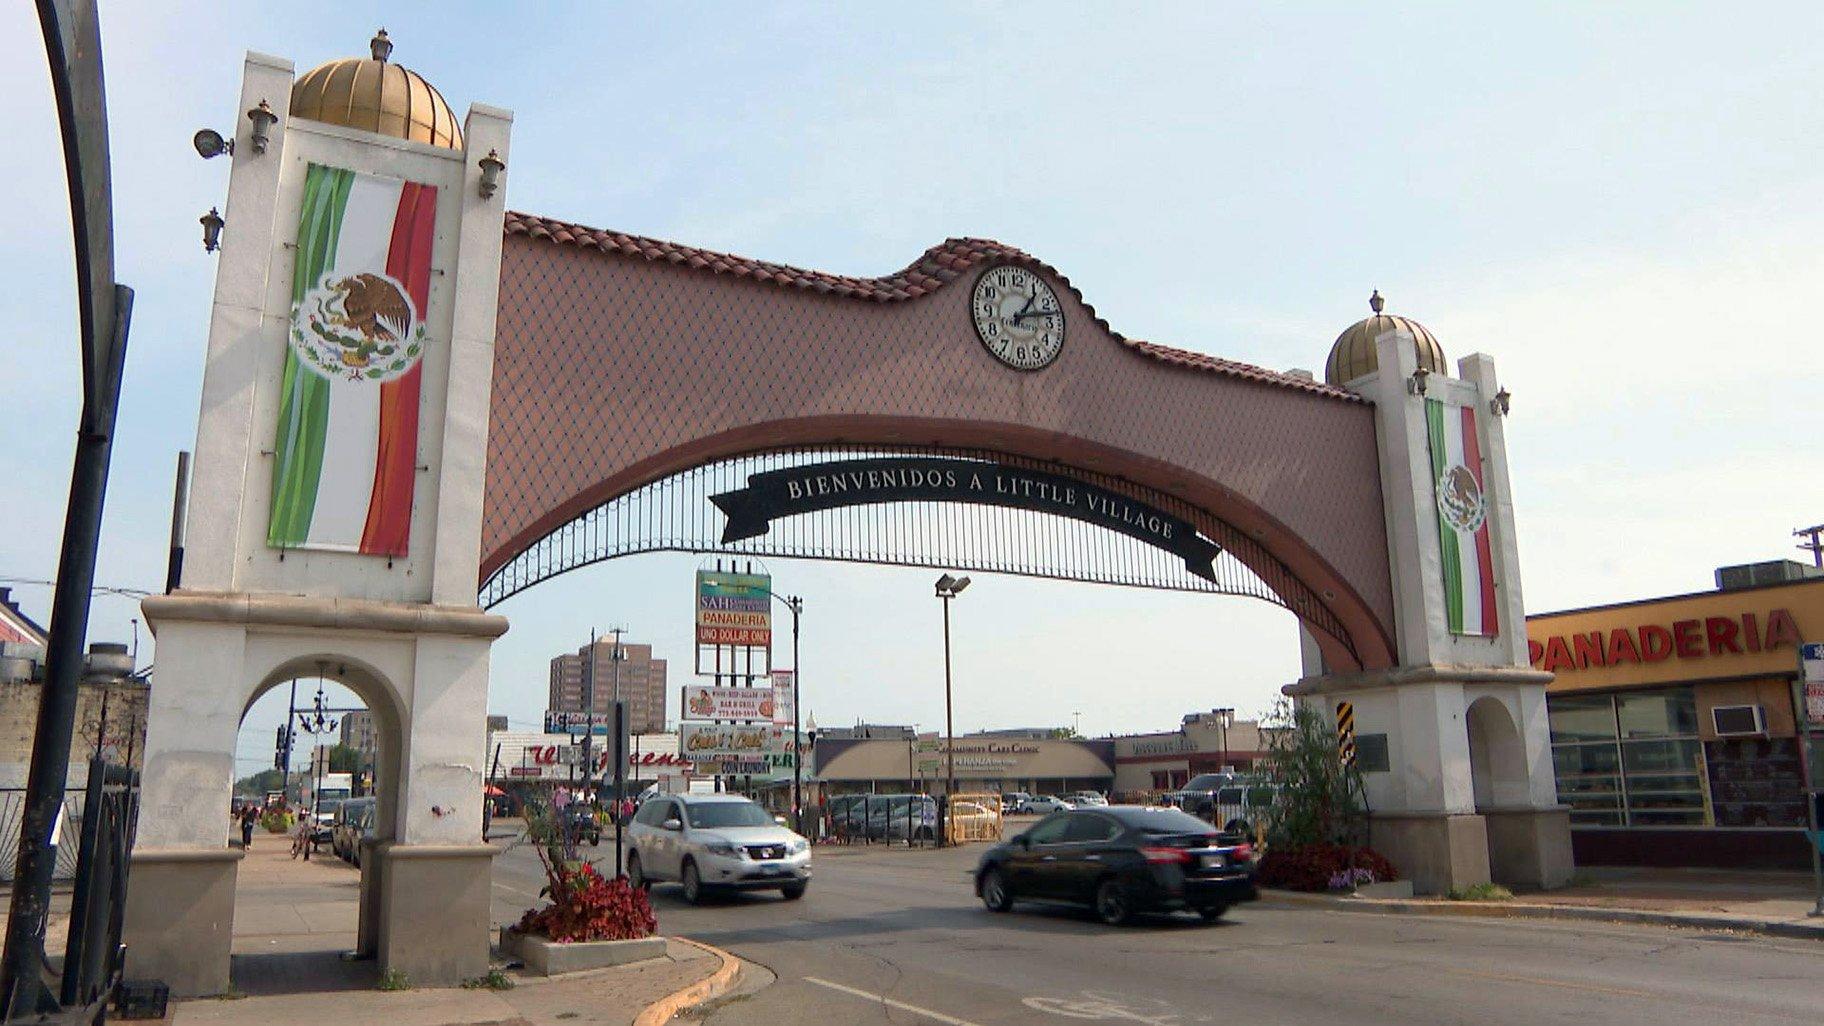 The iconic arch that welcomes everyone to La Villita is set to become an official landmark. (WTTW News)